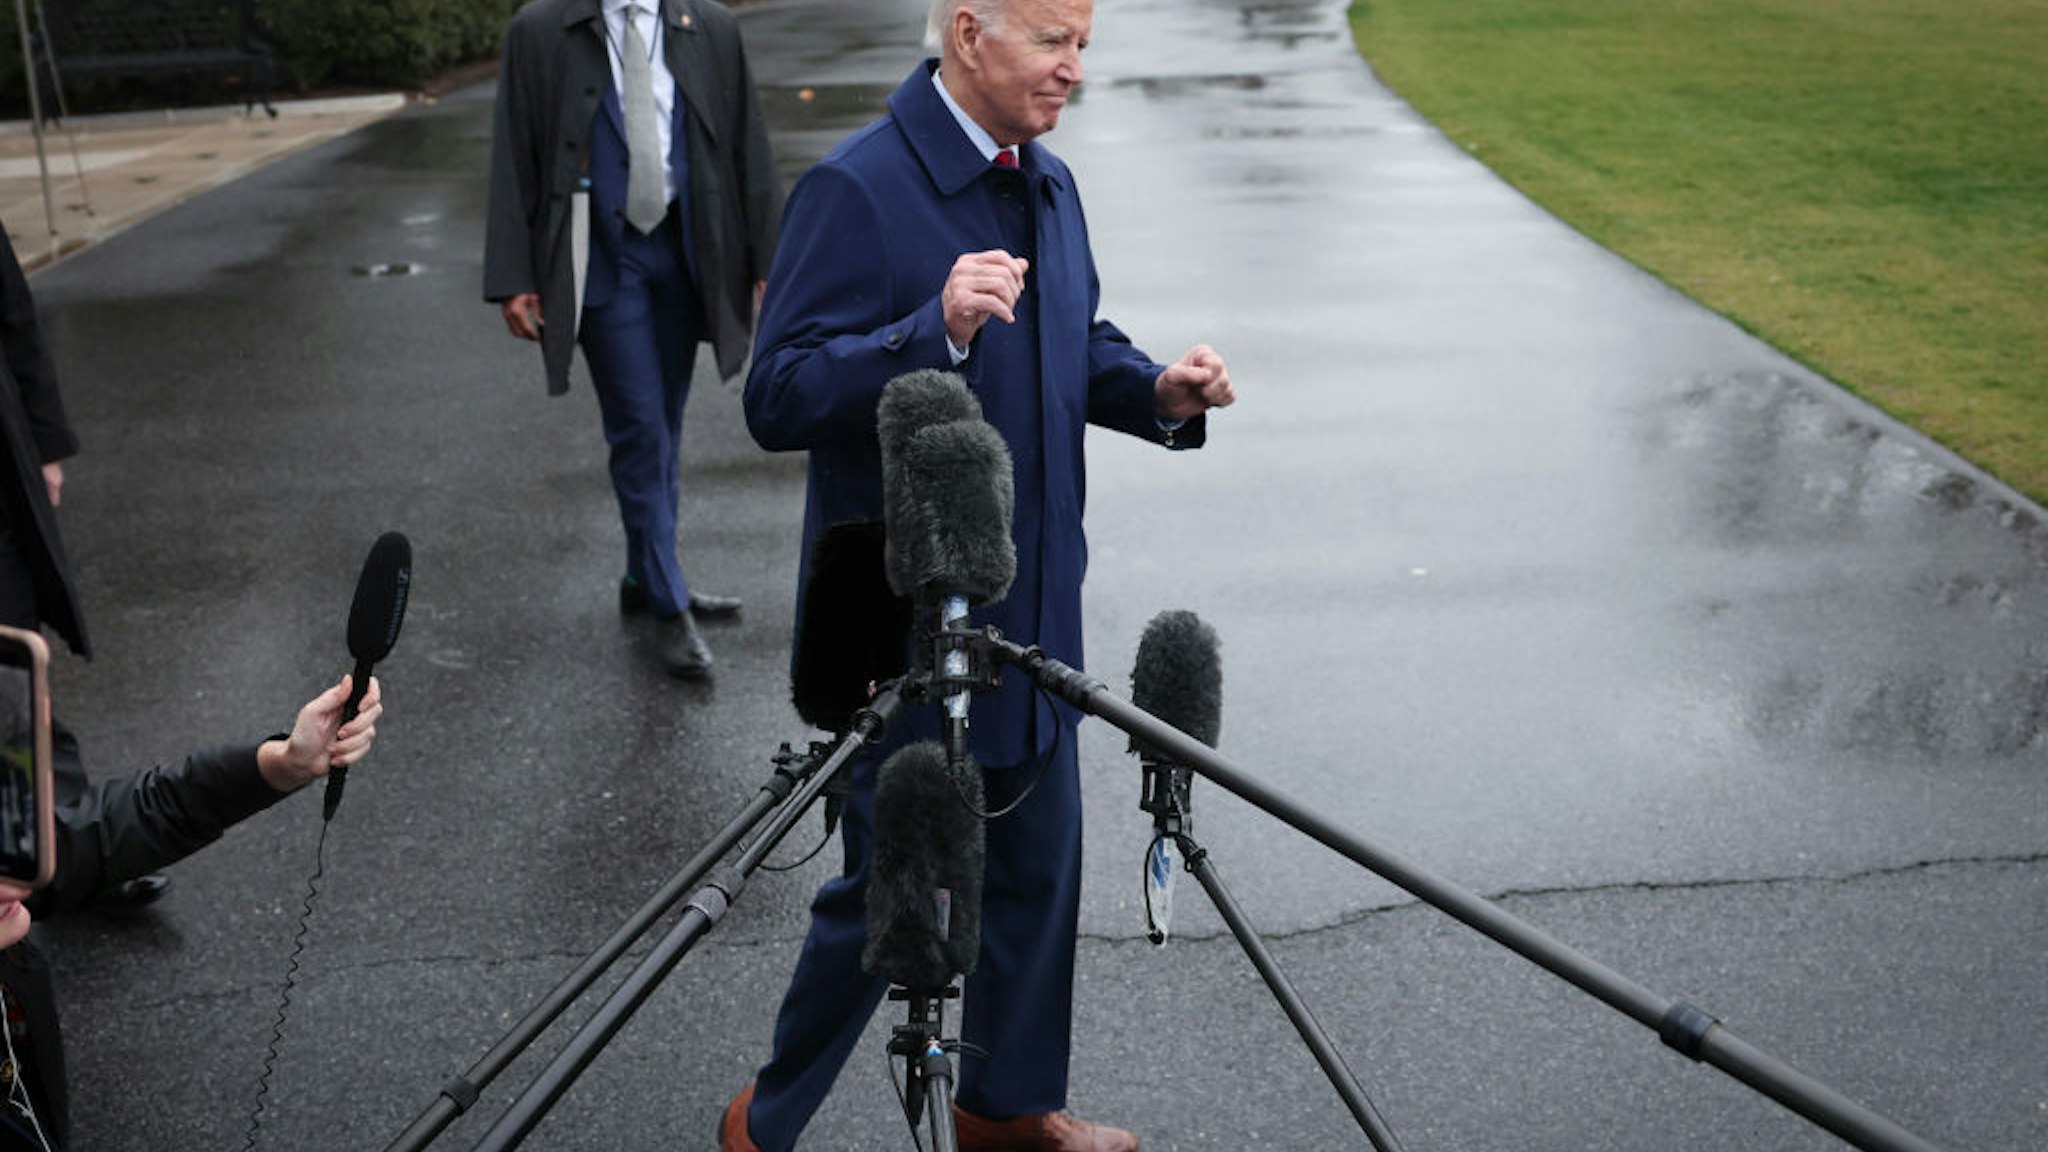 WASHINGTON, DC - MARCH 03: U.S. President Joe Biden speaks to reporters as he departs the White House March 3, 2023 in Washington, DC. Biden is scheduled to travel to his home in Wilmington, Delaware today. (Photo by